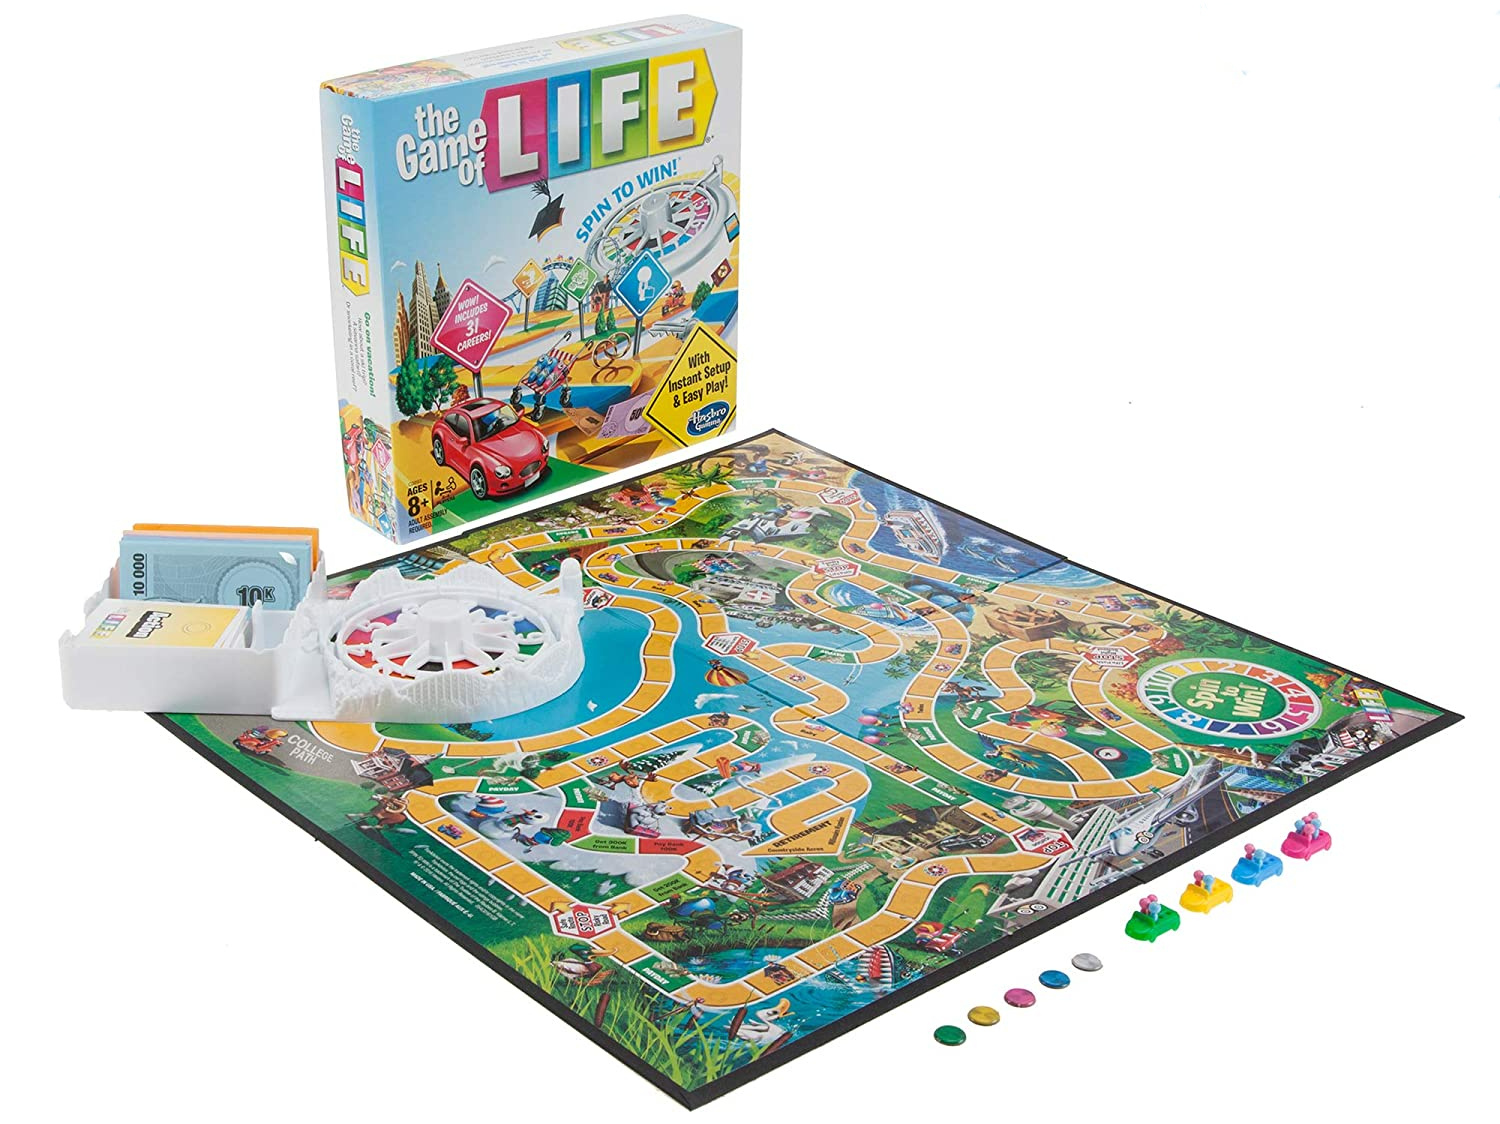 stock image of the hasbro game of life board game